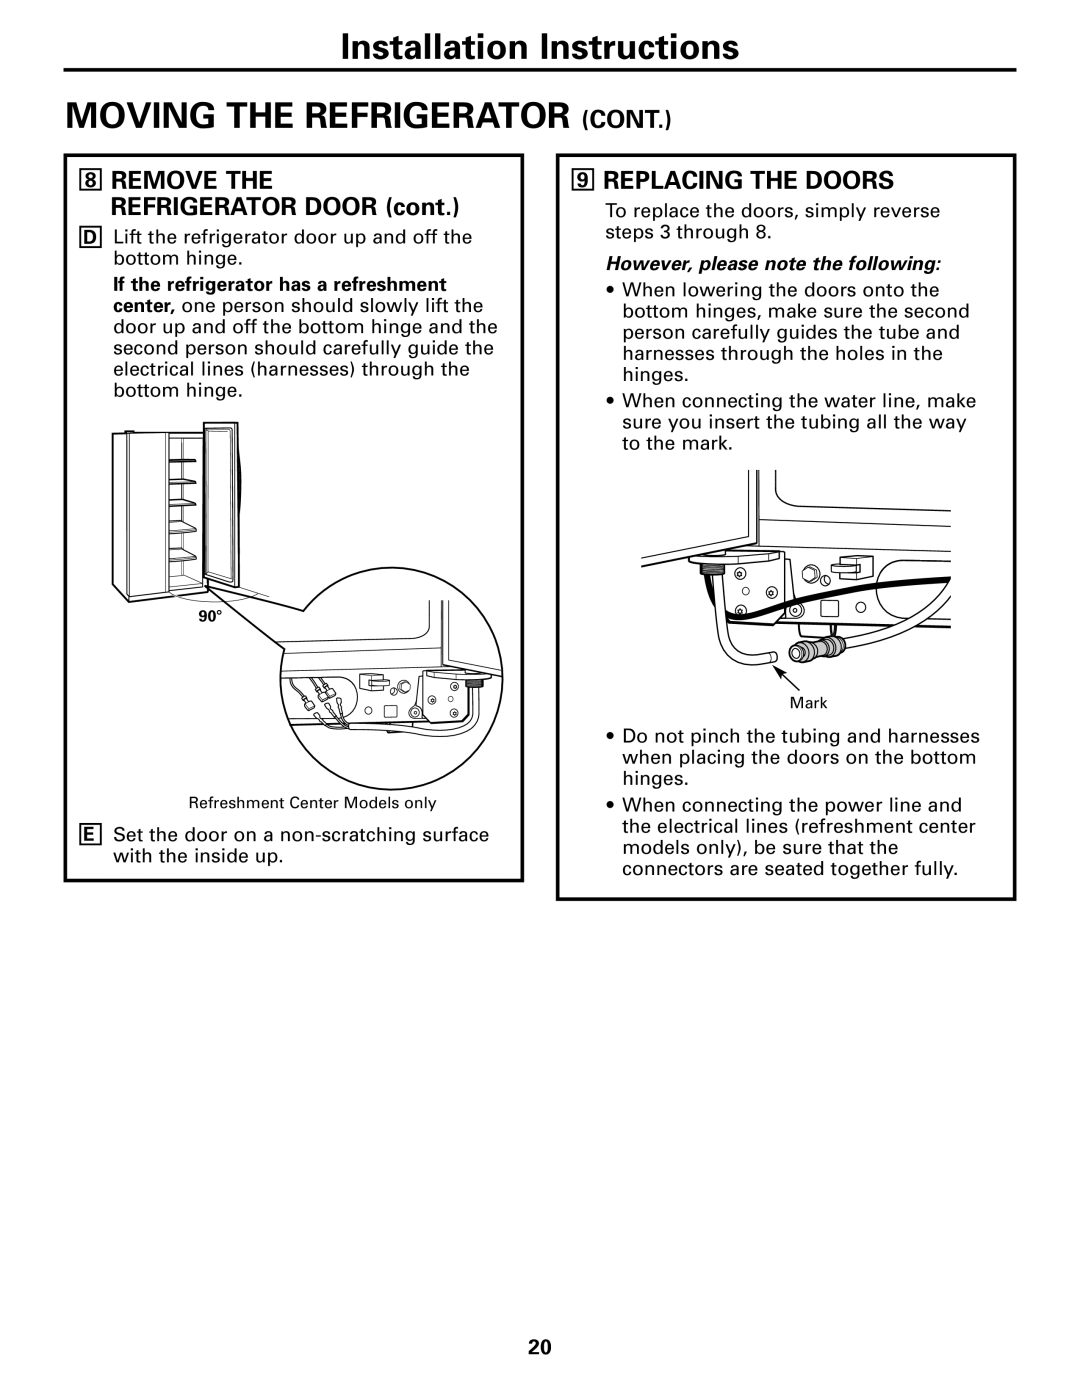 GE 22, 23, 25, 27 9REPLACING THE DOORS, 8REMOVE THE REFRIGERATOR DOOR cont, However, please note the following 